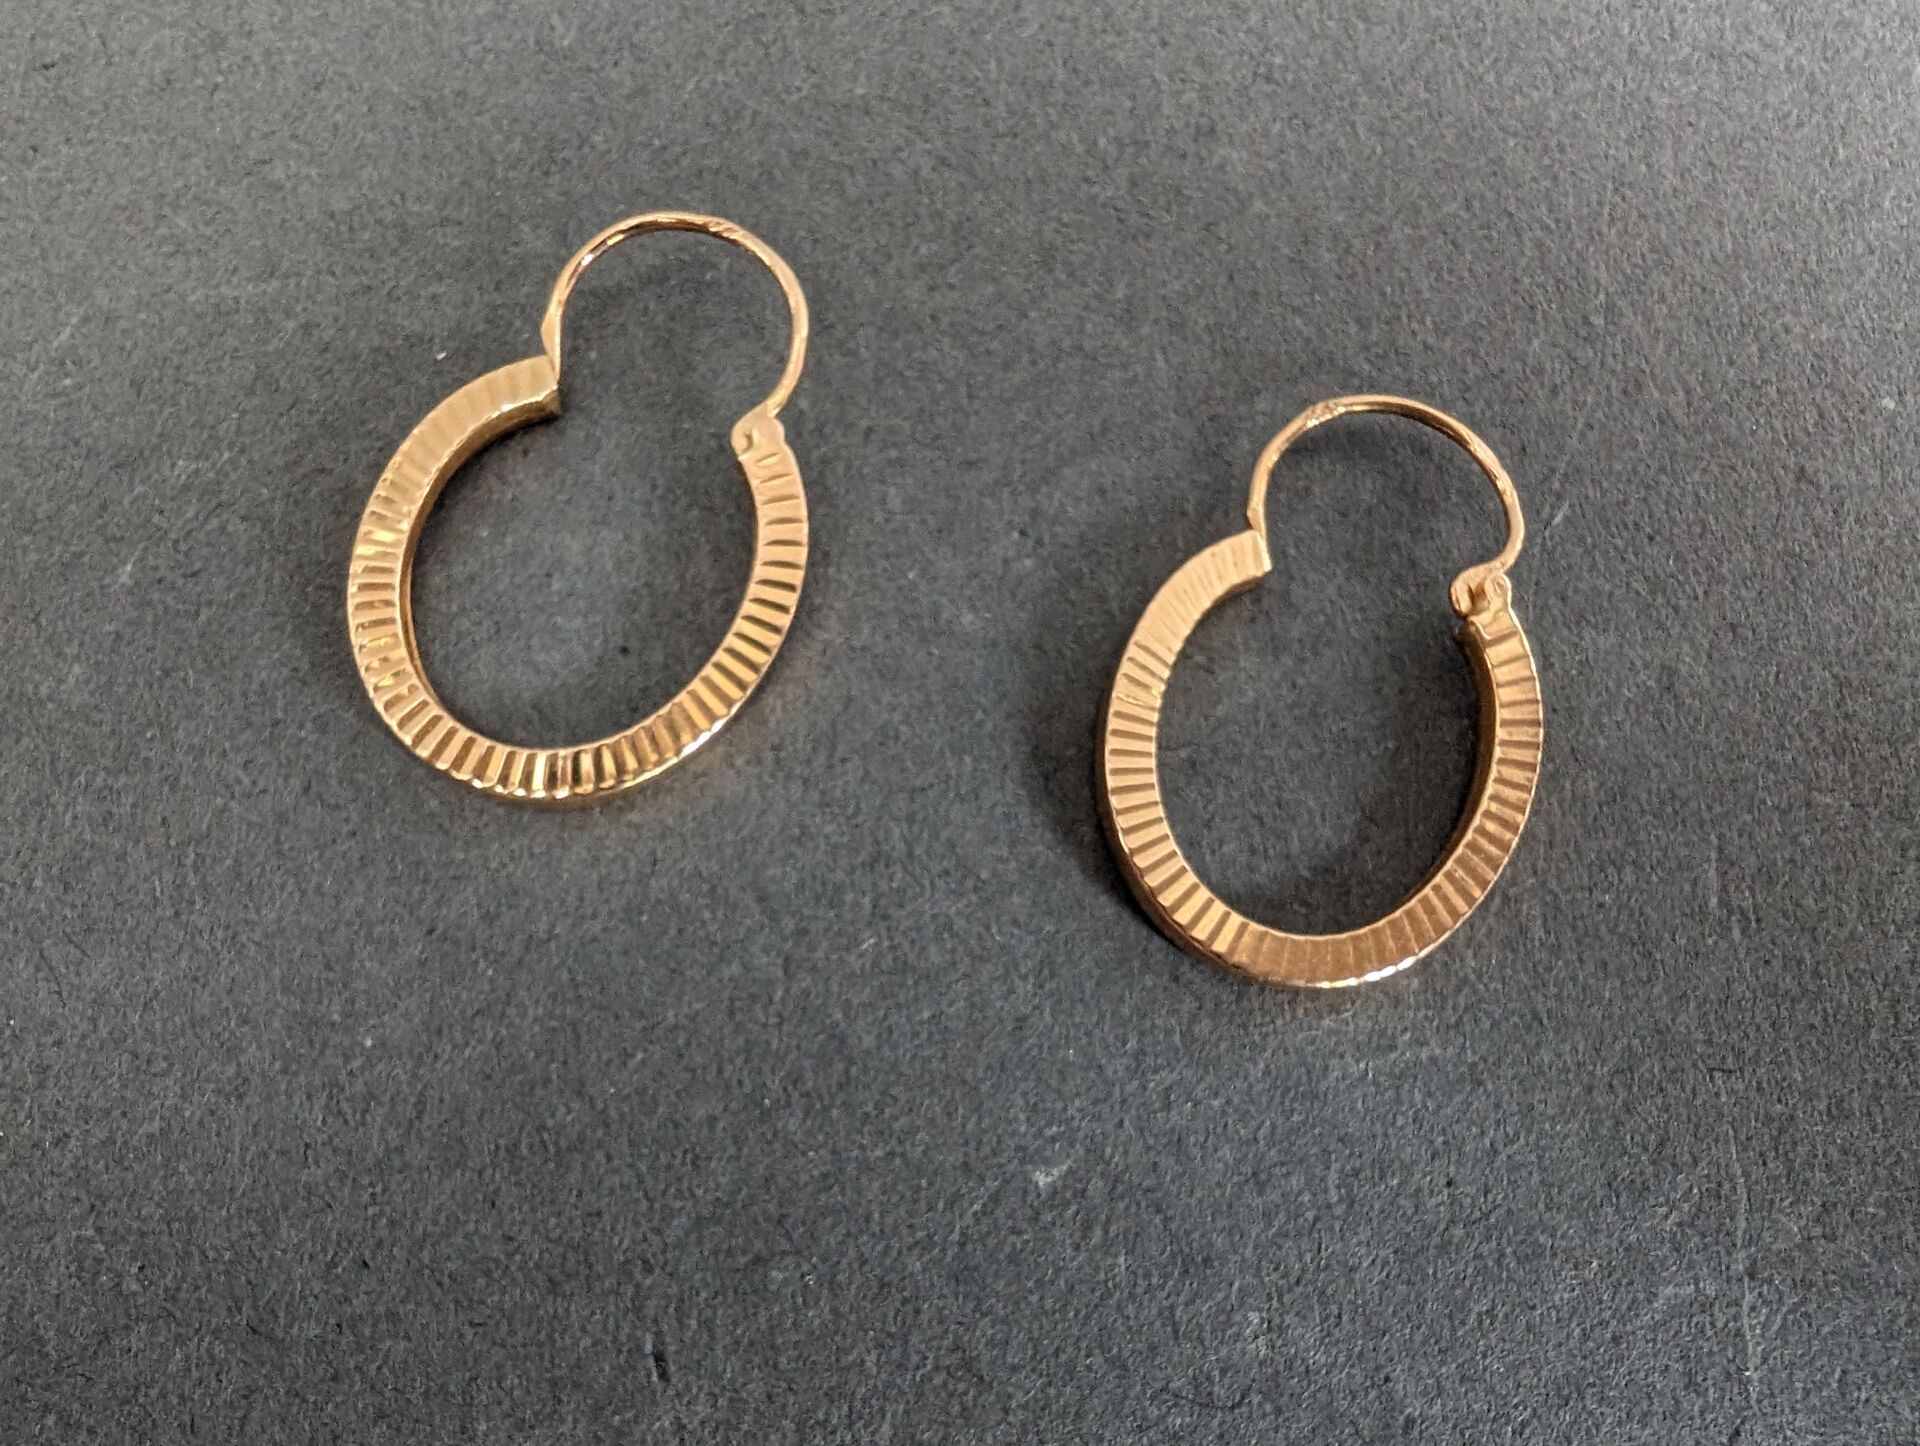 Null Pair of earrings in 18 K yellow gold
guilloché hoop
Weight: 1.48g